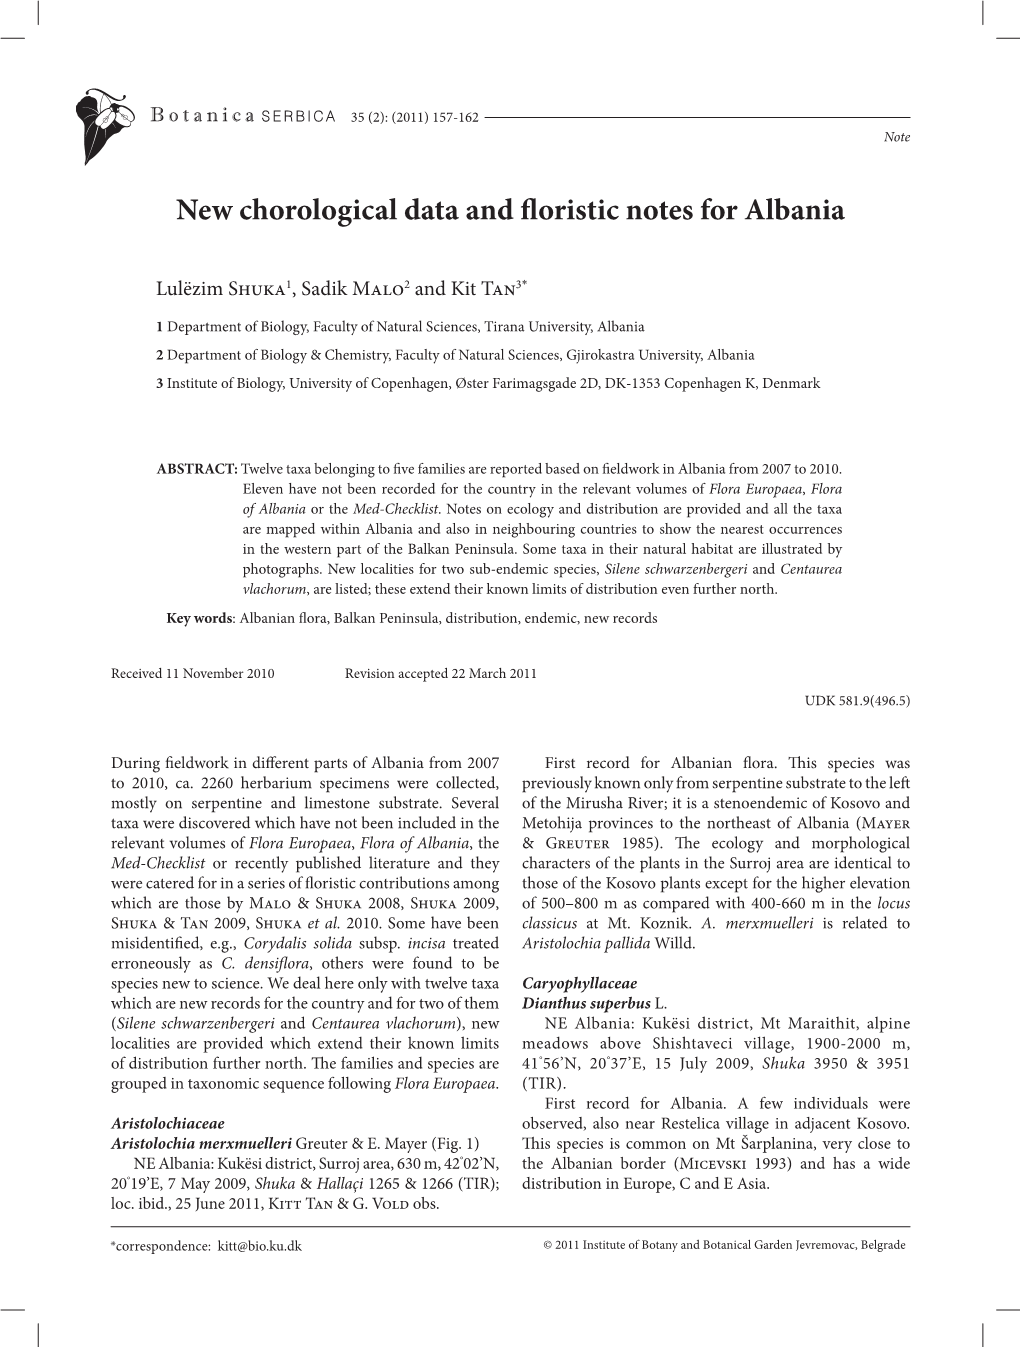 New Chorological Data and Floristic Notes for Albania